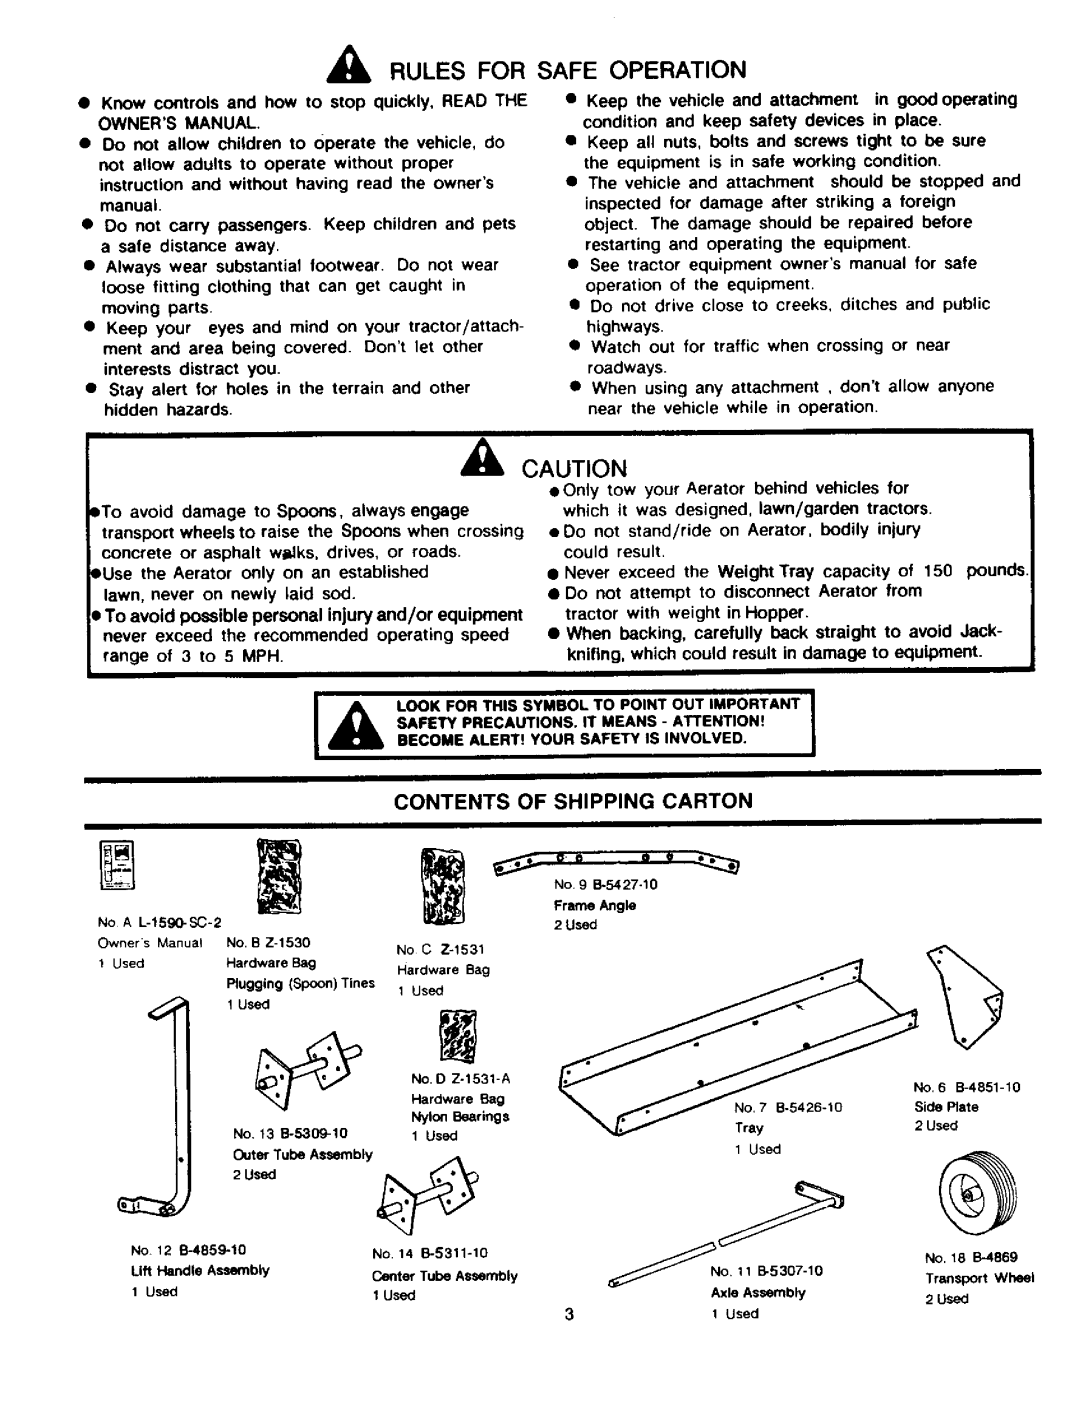 Craftsman 757.243481 owner manual Rules For Safe Operation, A Caution, Contents Of Shipping Carton 